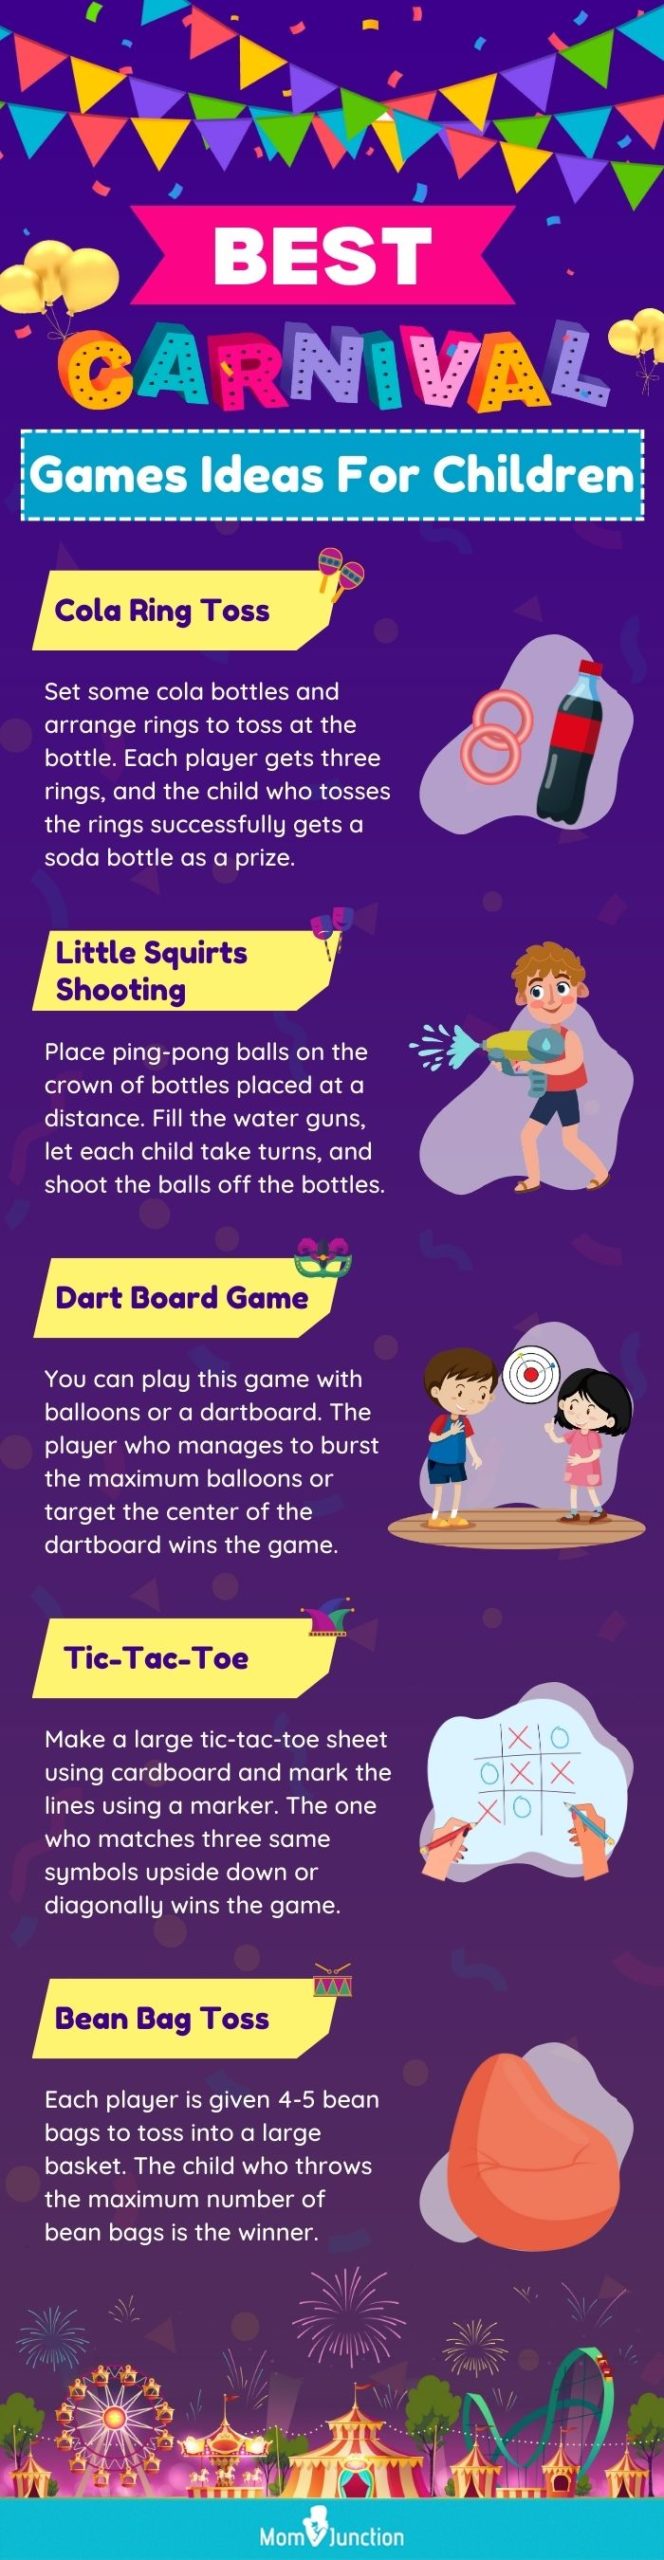 best carnival games ideas for children (infographic)